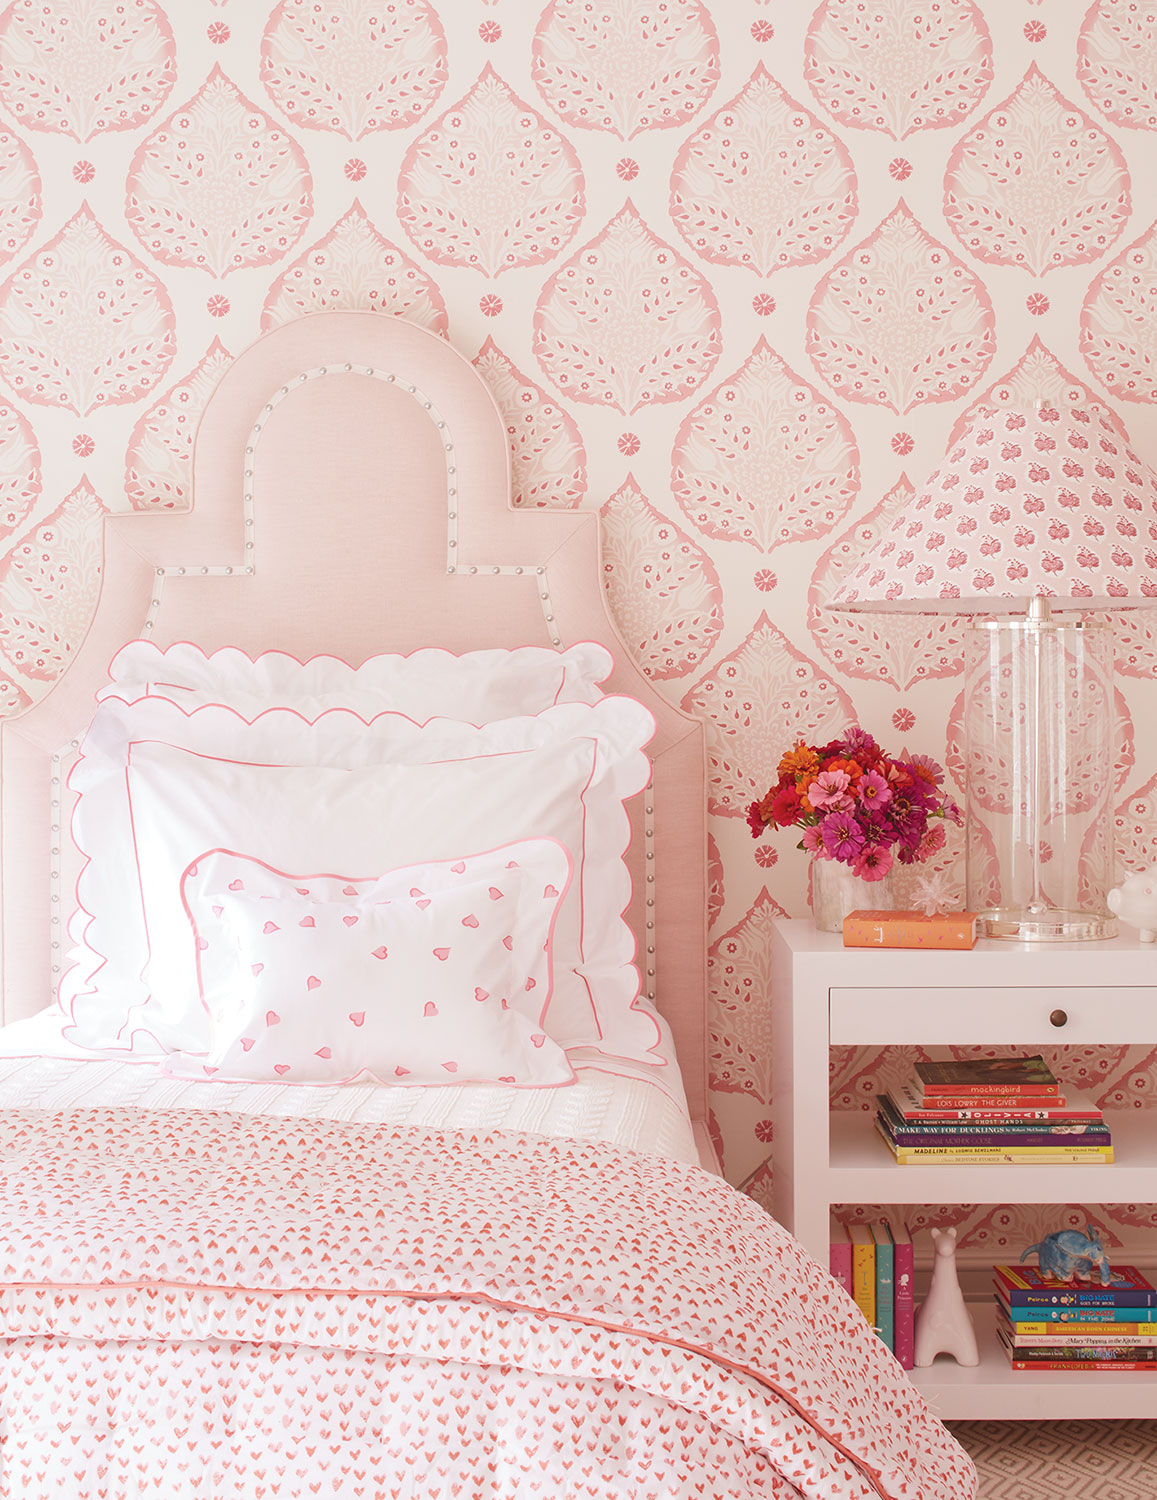 Pink on pink girl's bedroom designed by Ashley Whittaker.